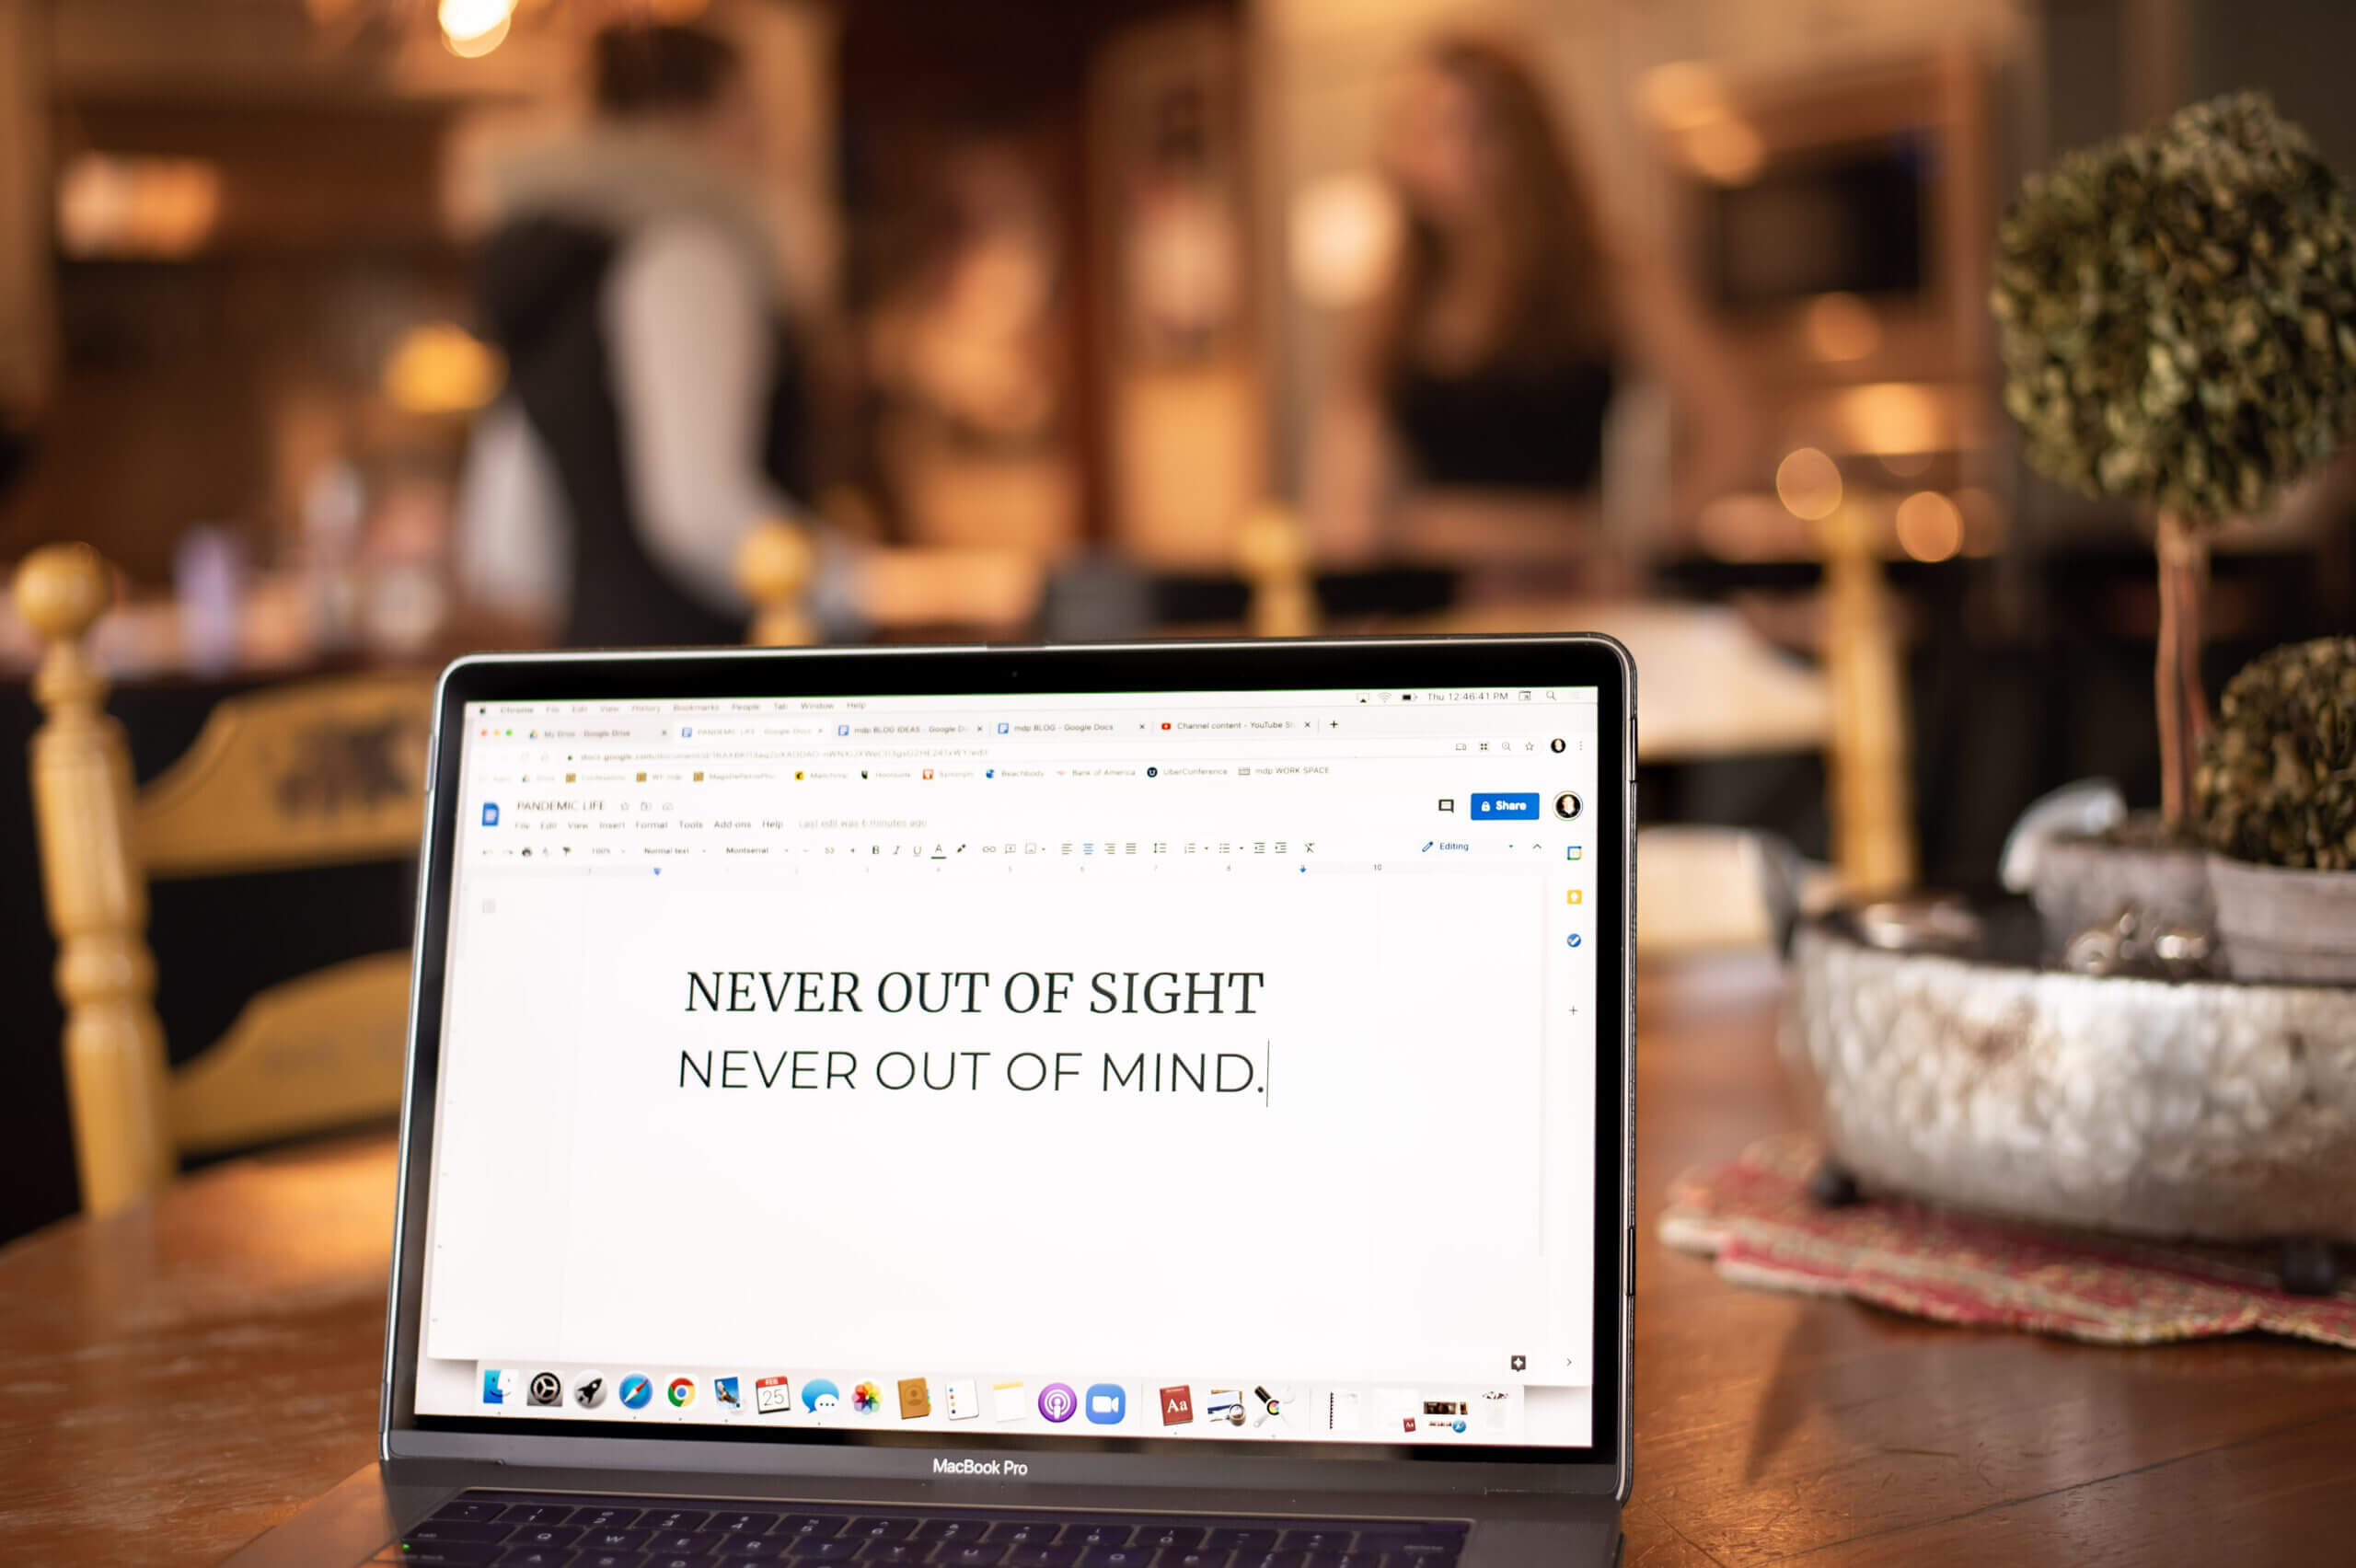 A MacBook Pro laptop sitting on a table with the phrase, “Never out of site, never out of mind” typed on the screen and the 2 teens talking in the background out of focus.